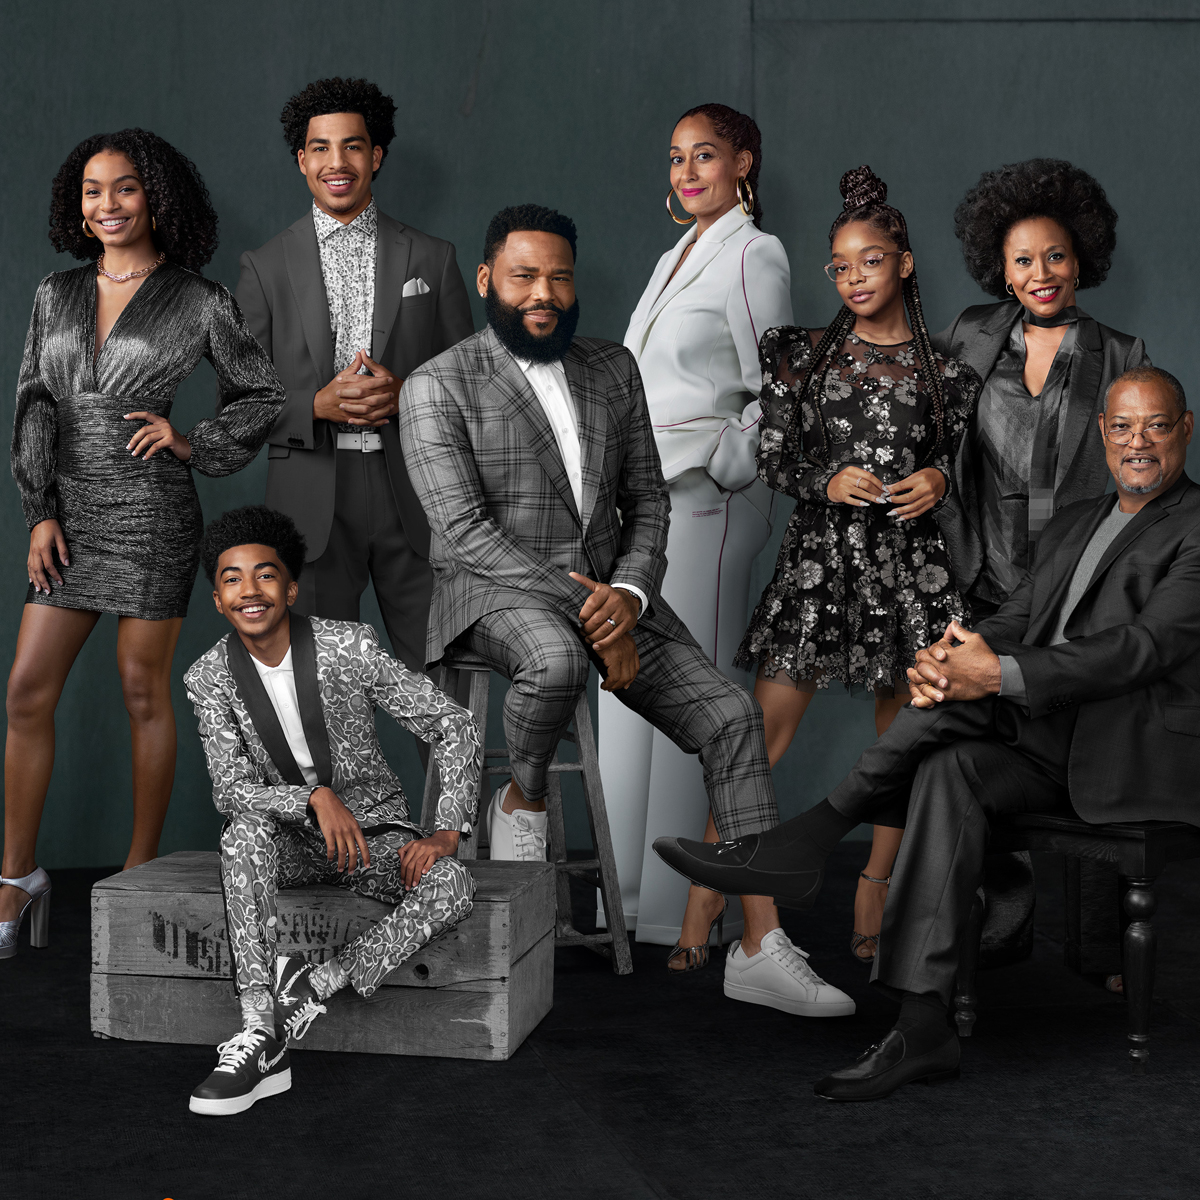 black-ish Primetime Special Features Screen Tests From Pilot